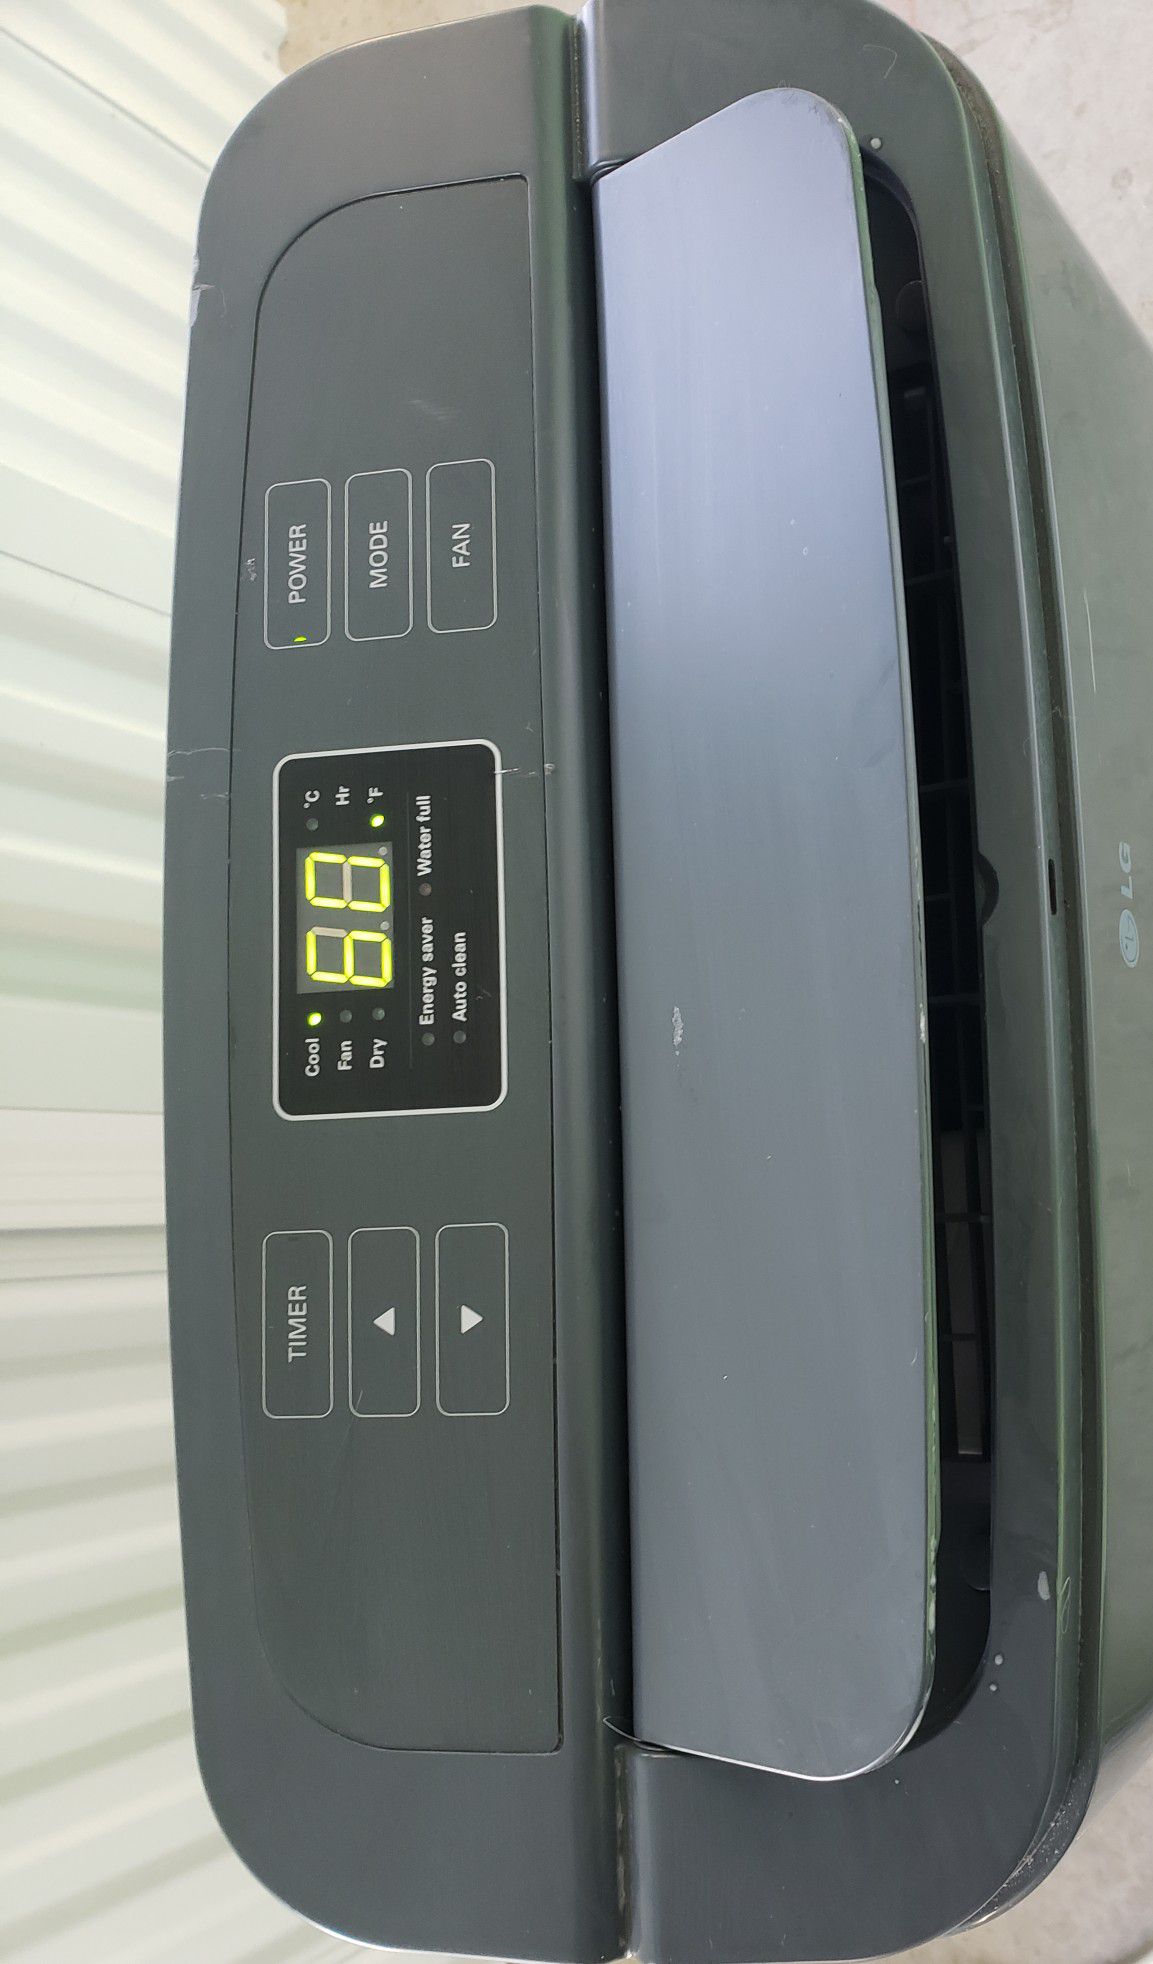 LG air conditioning